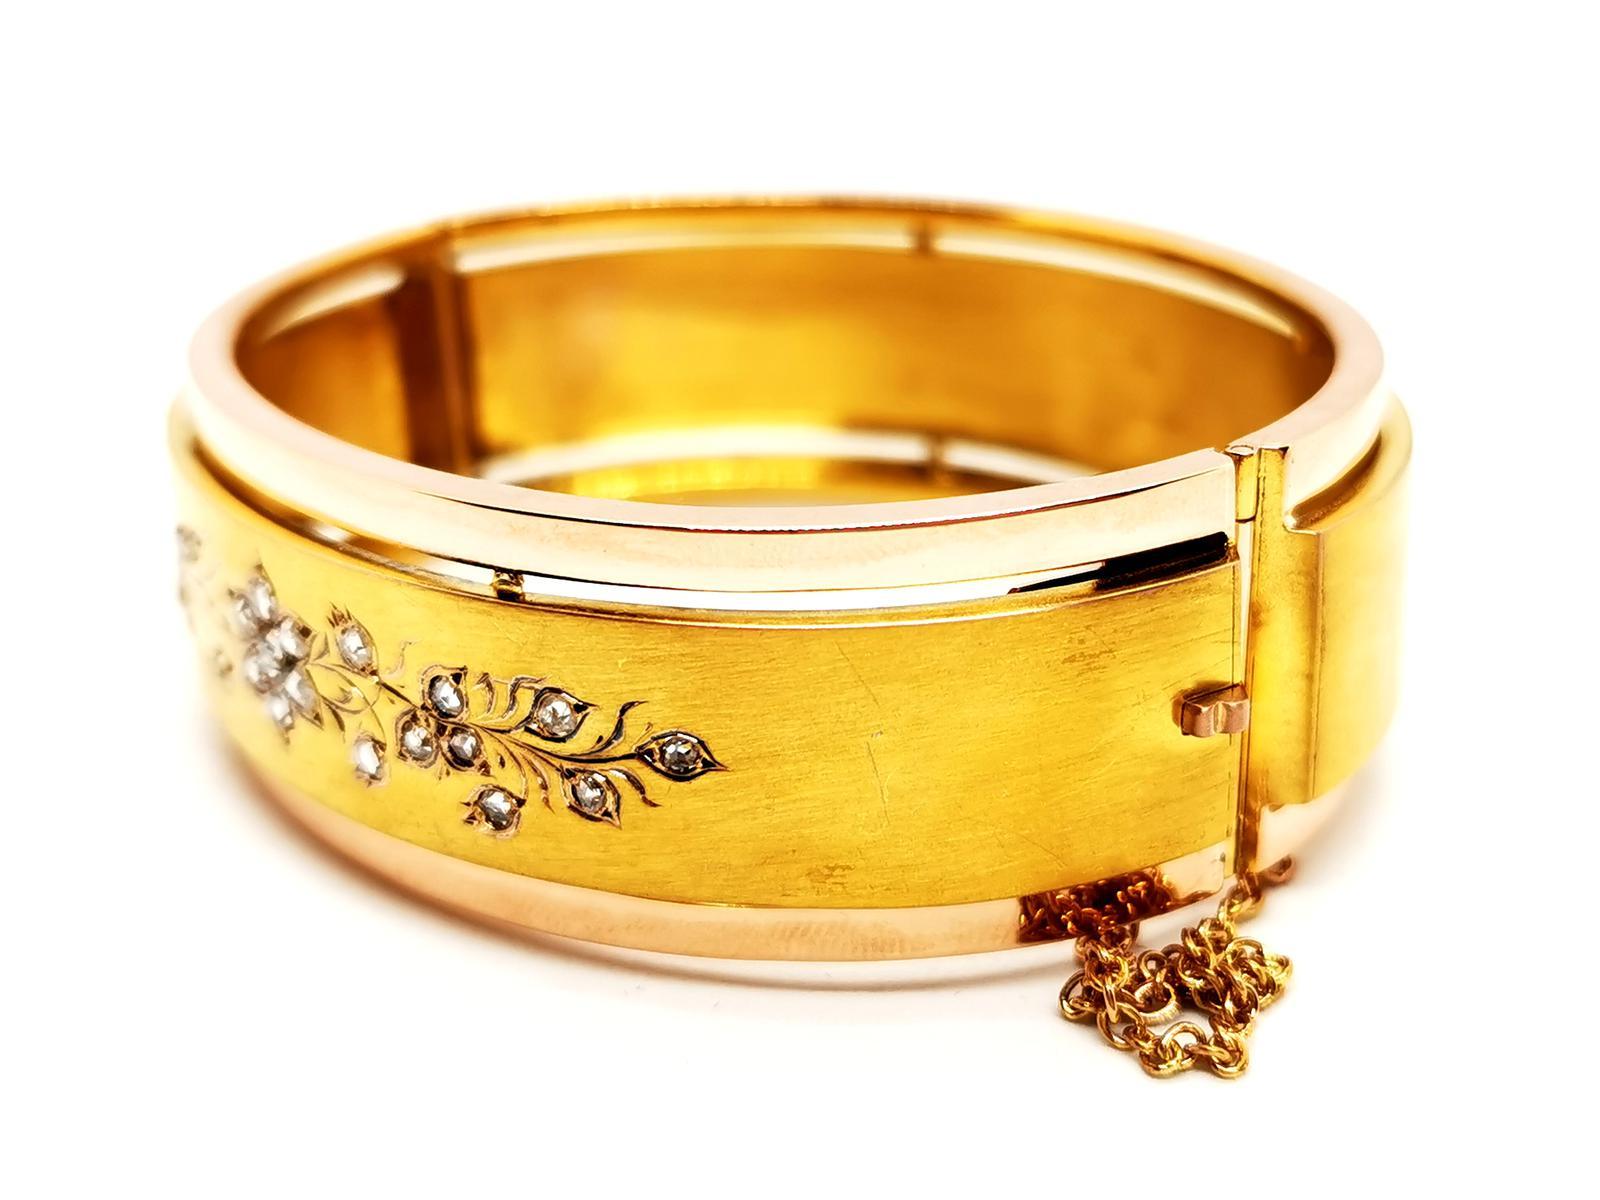 Old gold and diamond cuff bracelet. second half of the 19th century. in yellow and pink gold 750 thousandths (18 carats). in the center a matt yellow gold band. enhanced with an engraved floral motif. set with 22 old cut diamonds. weight total